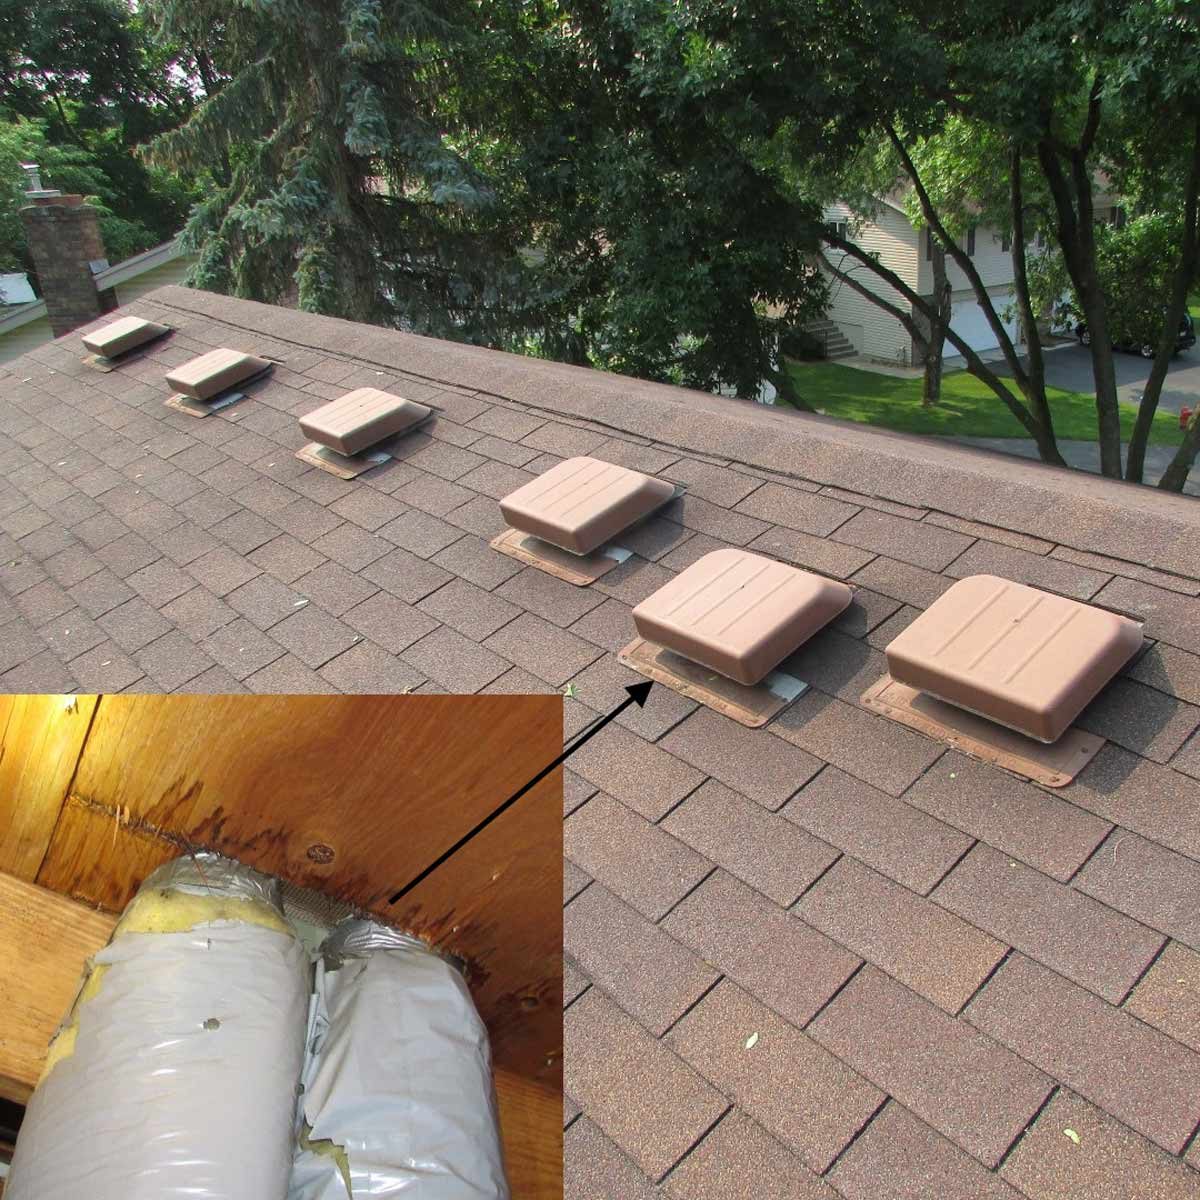 How to Install a Roof Vent